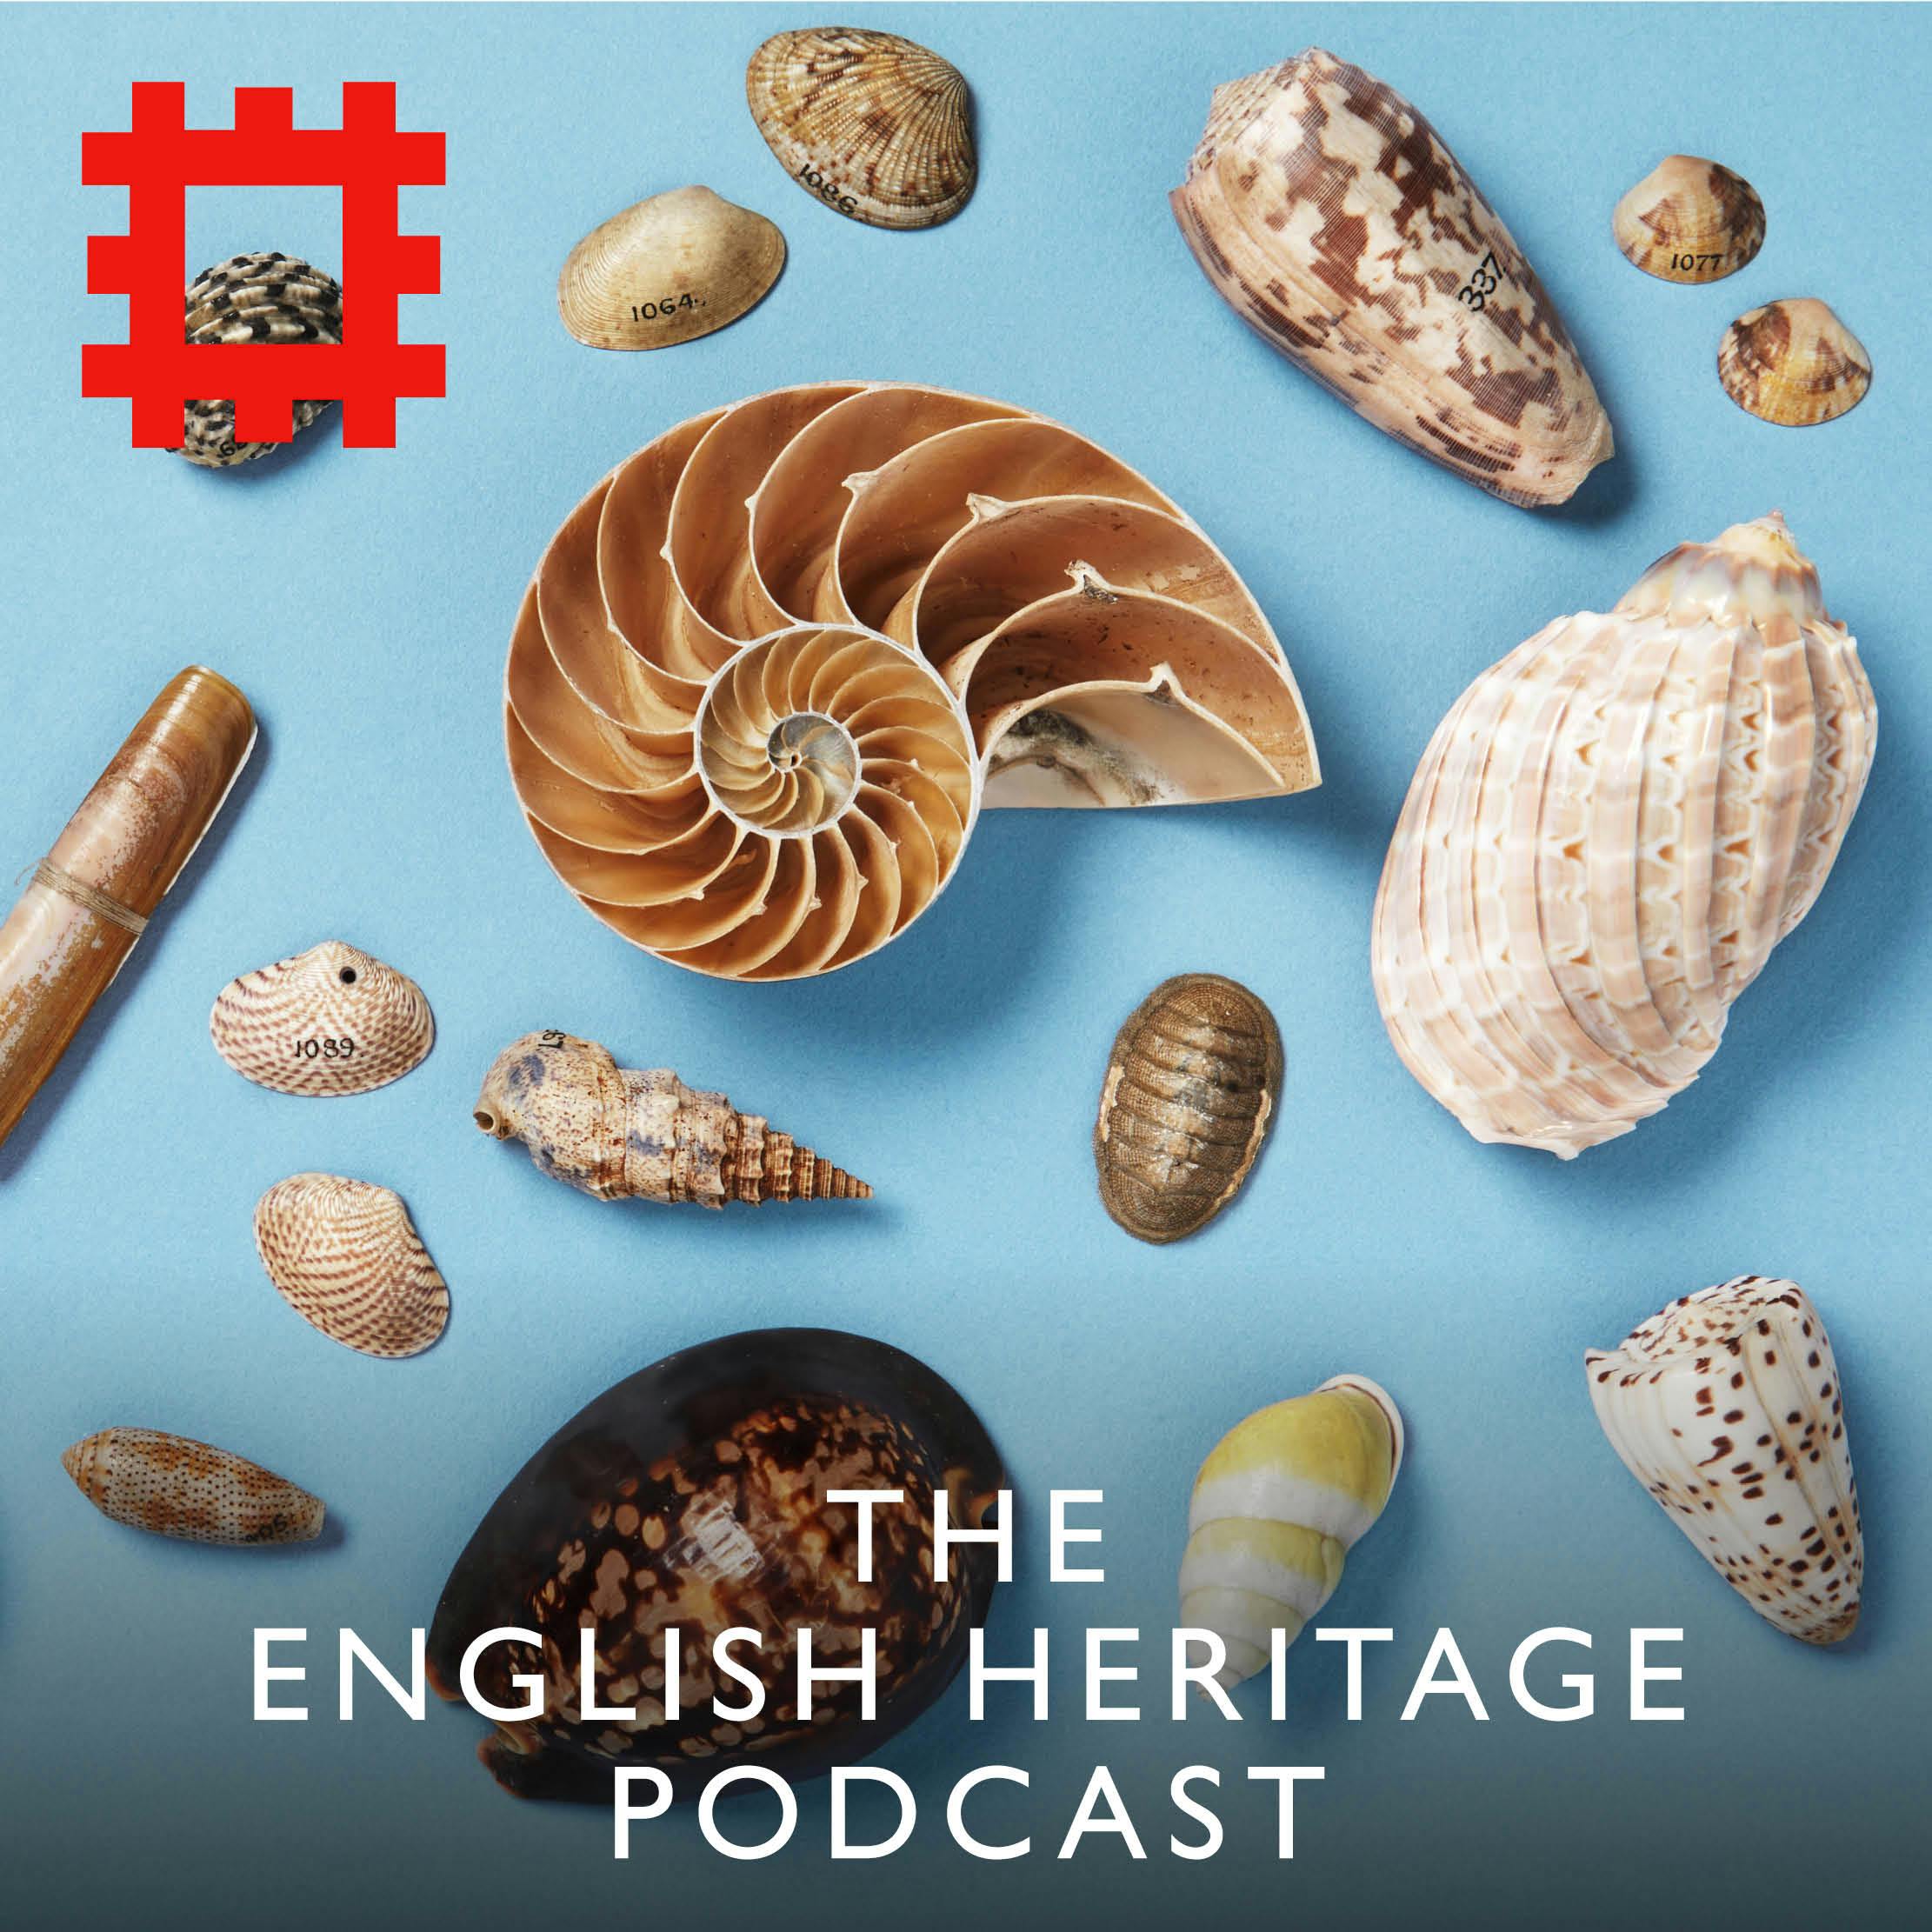 Episode 259 - Long lost shells returned: from Captain Cook’s voyage to Chesters Roman Fort (via a skip)